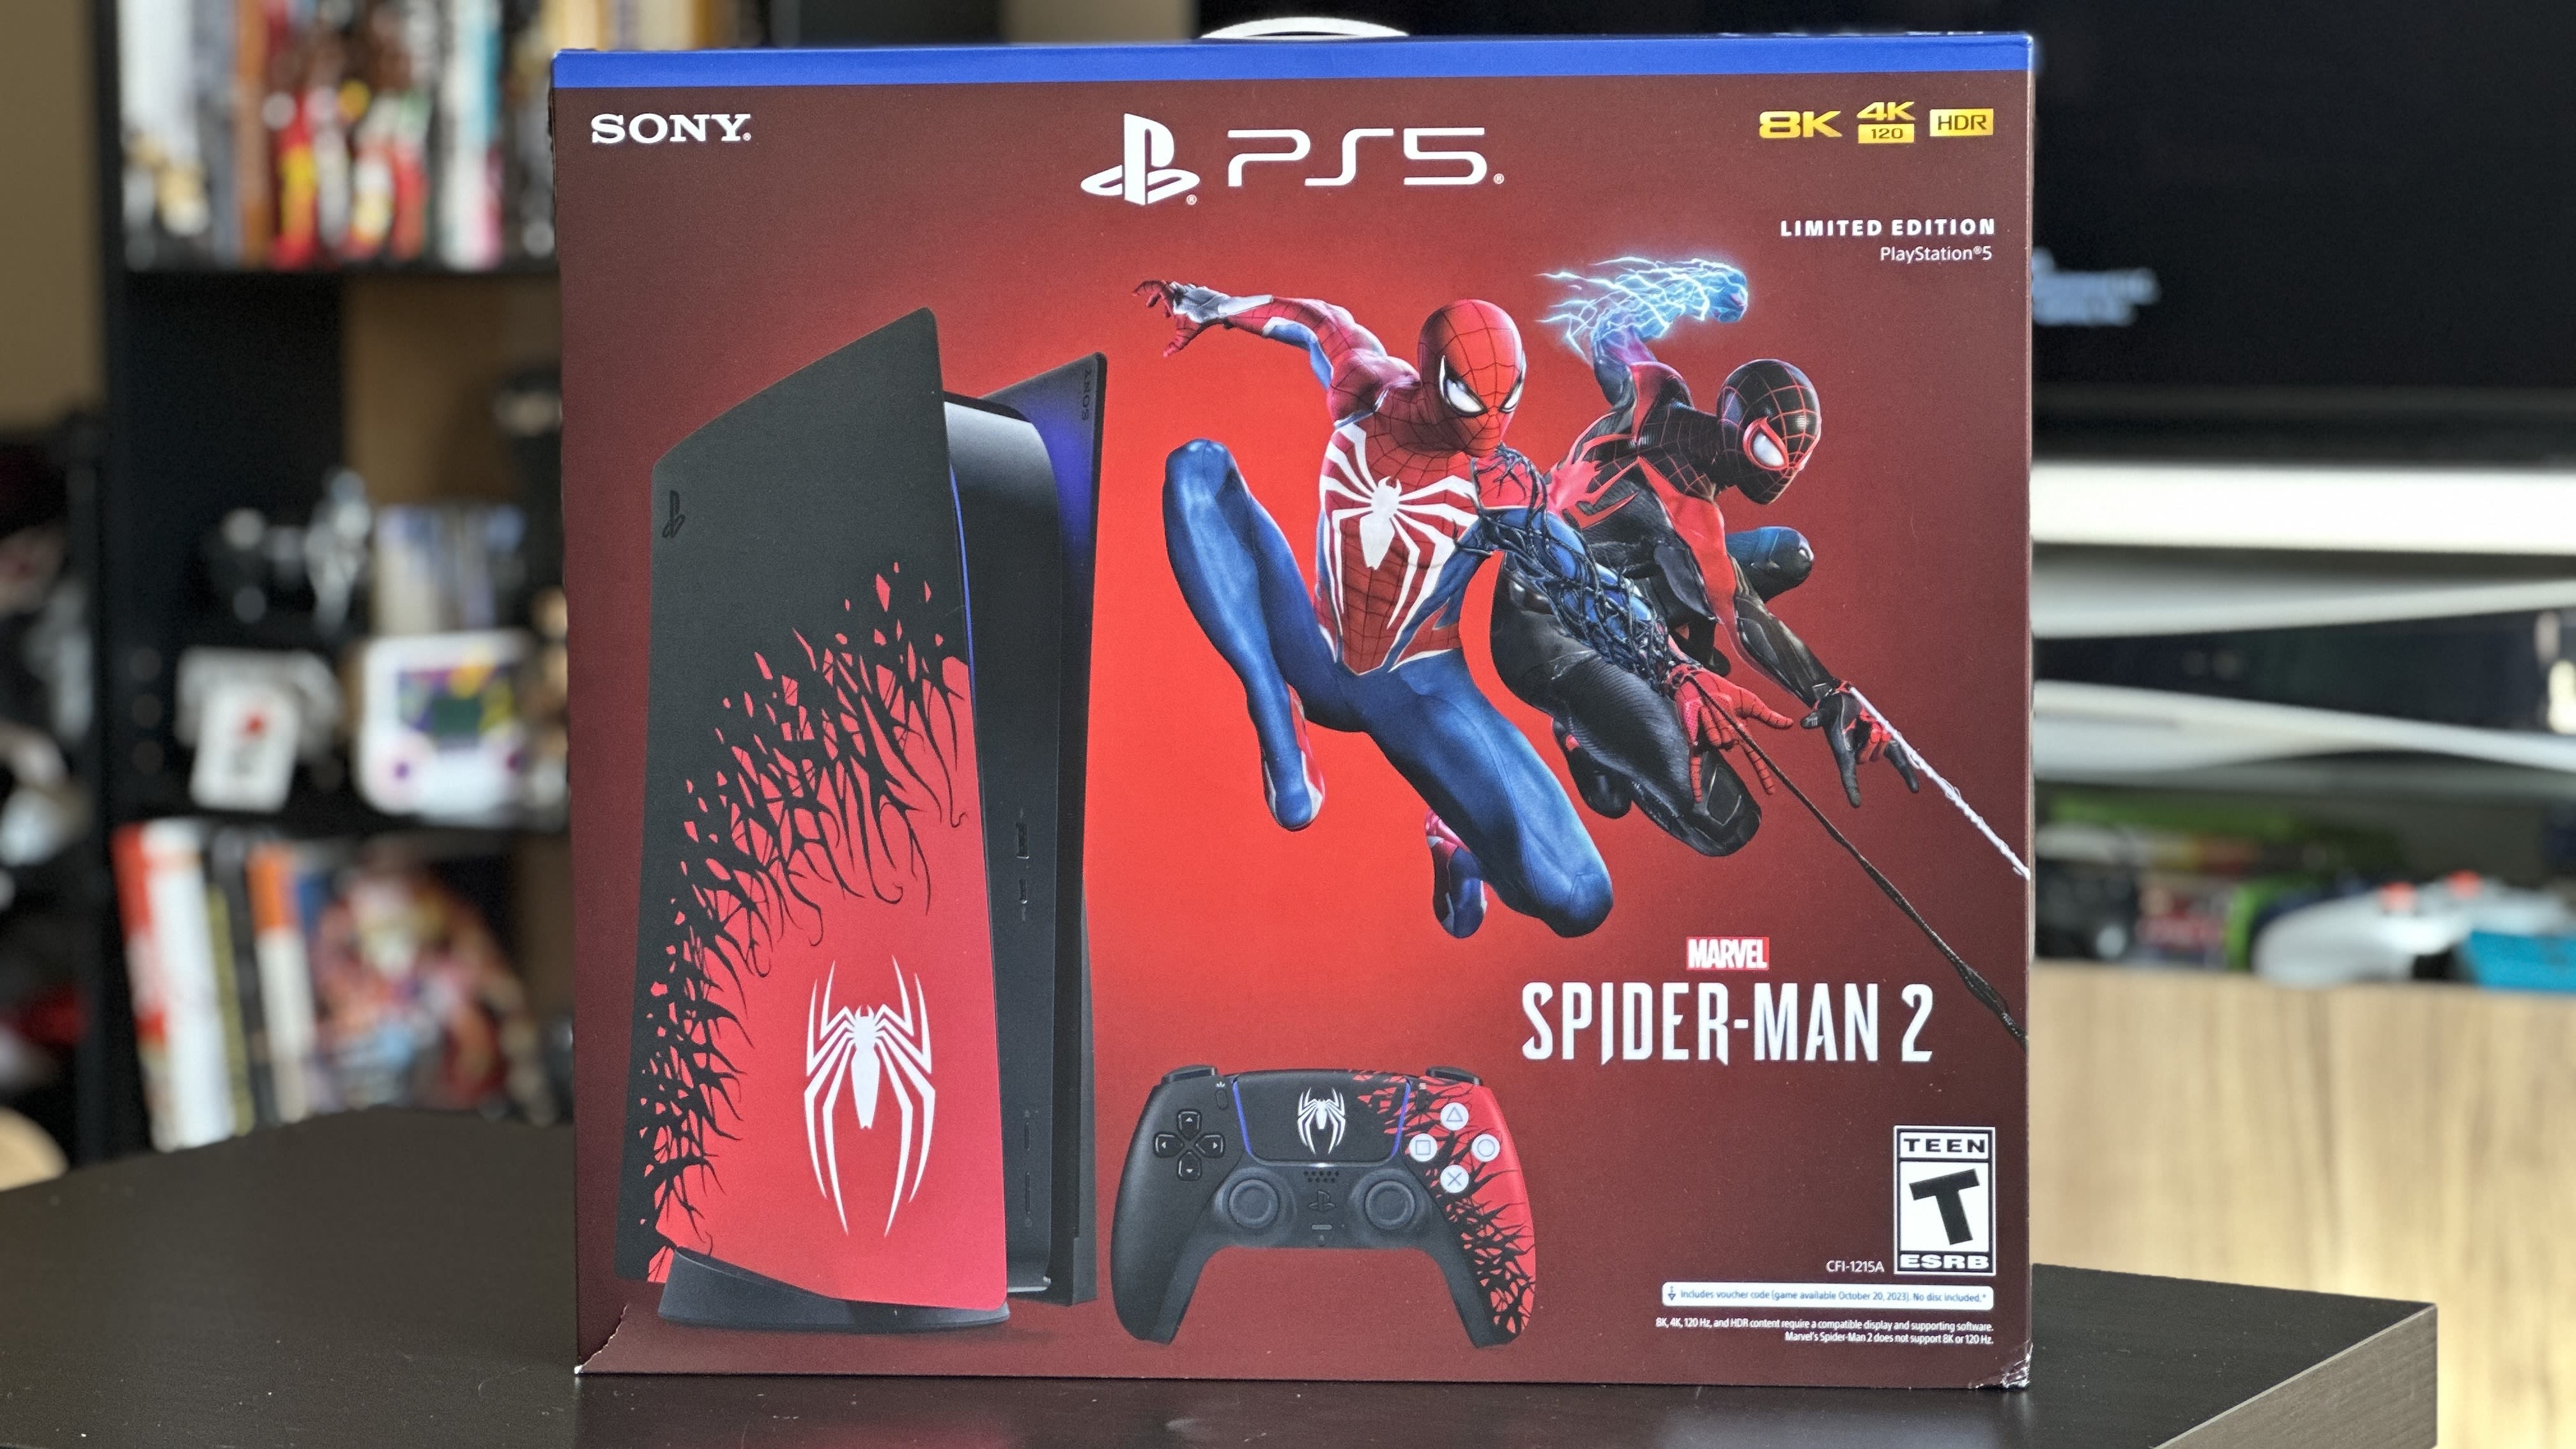 Game One - PlayStation PS5 Spider-Man 2 Limited Edition Console